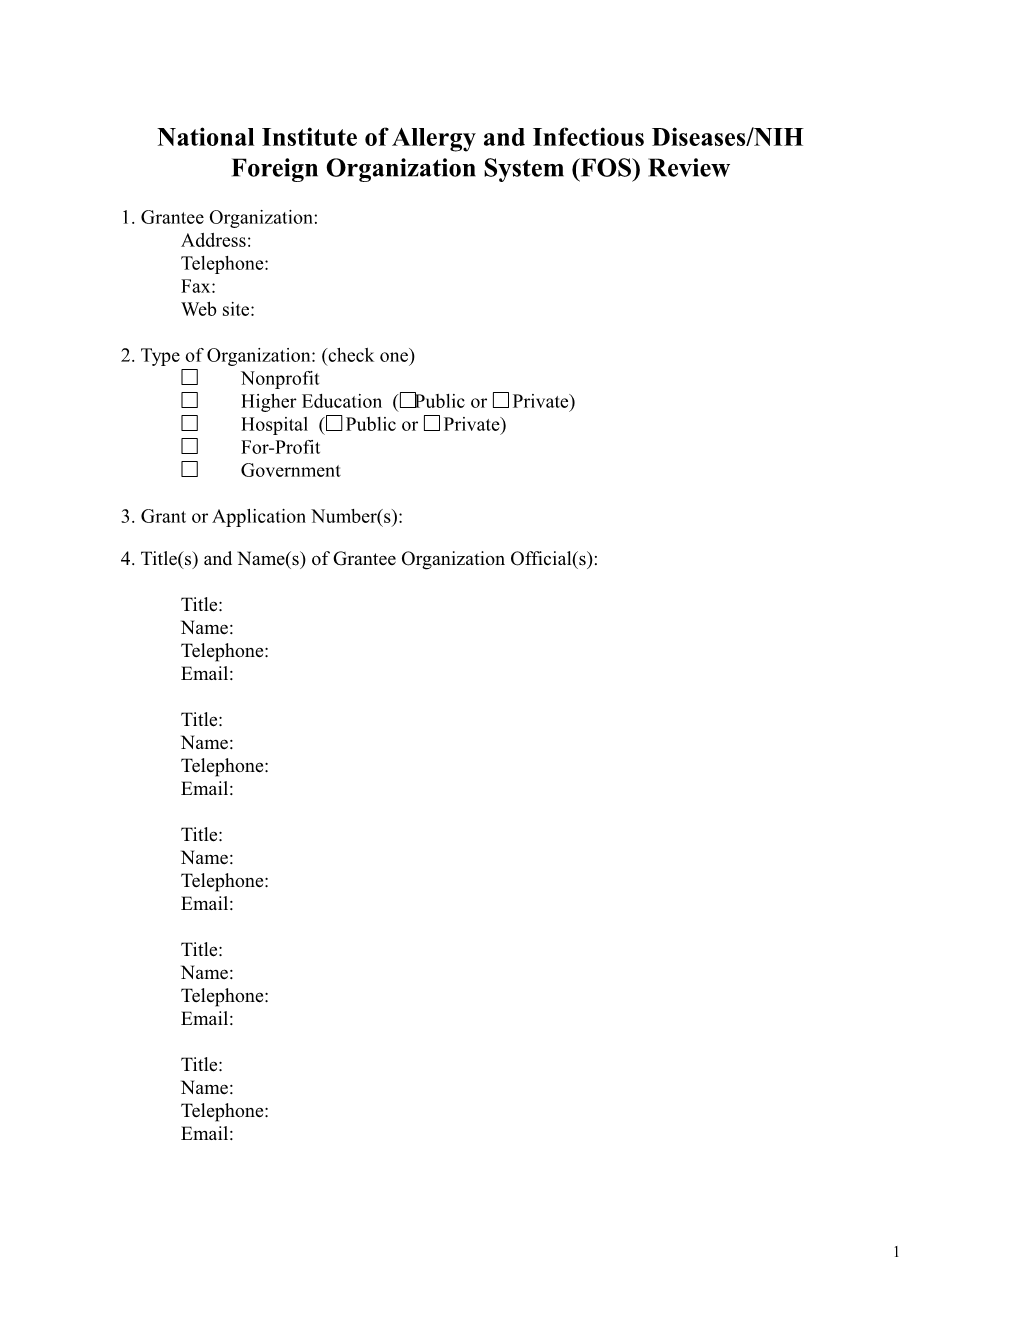 Foreign Organization System Review